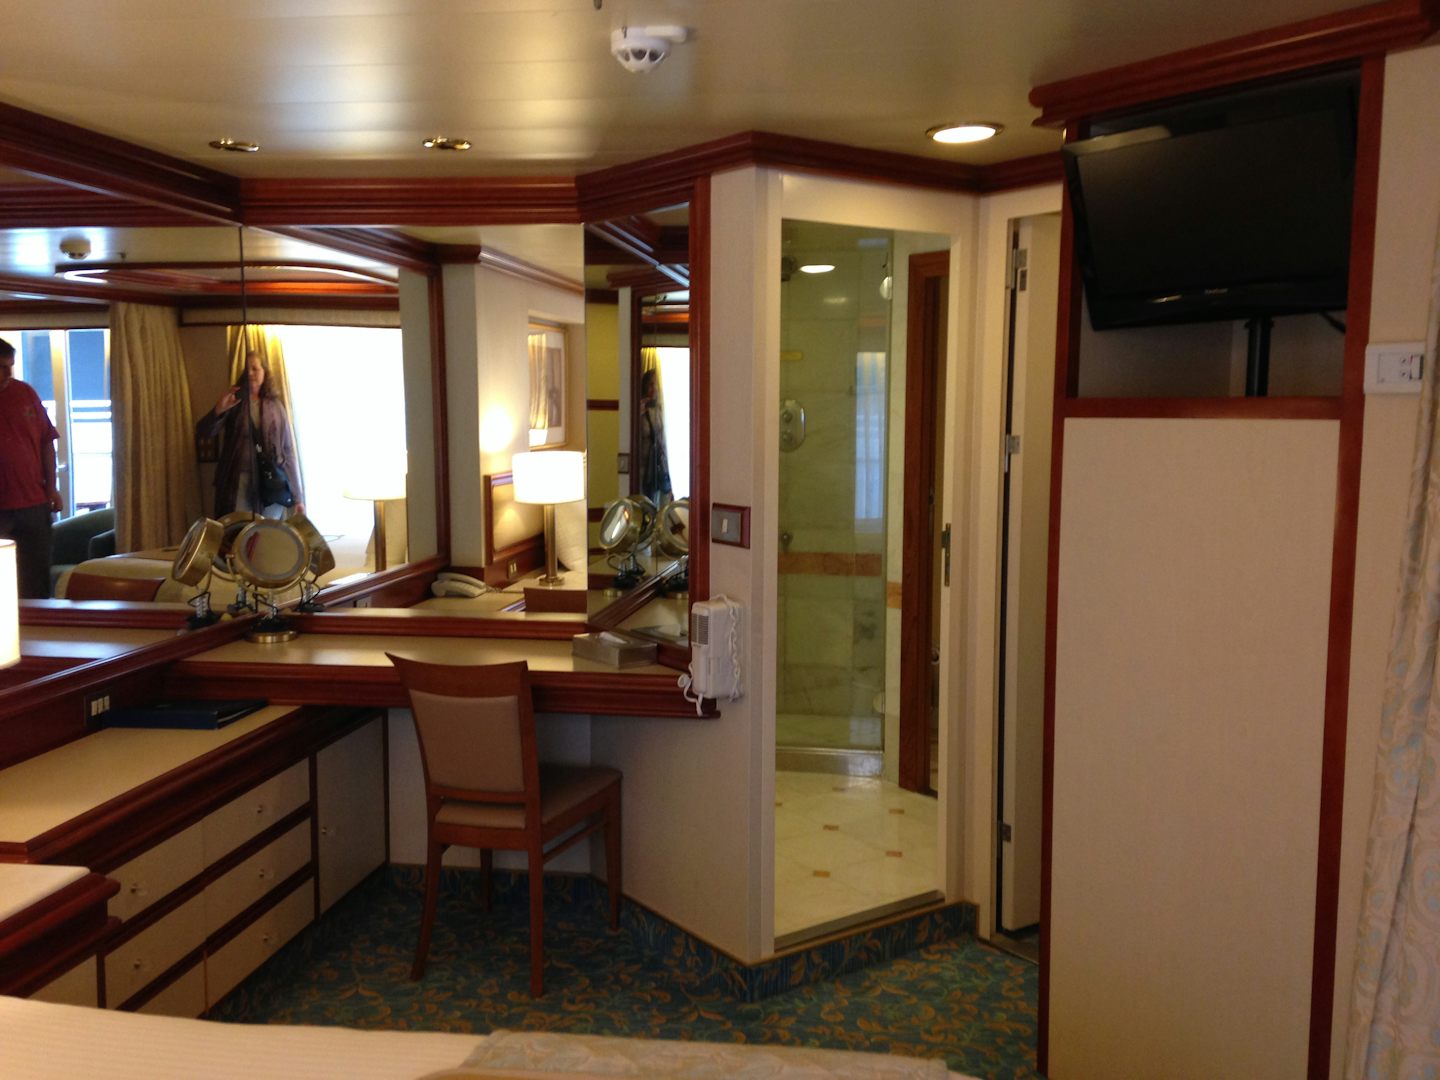 Plenty of space and drawers. In d630 (Hawaii suite)